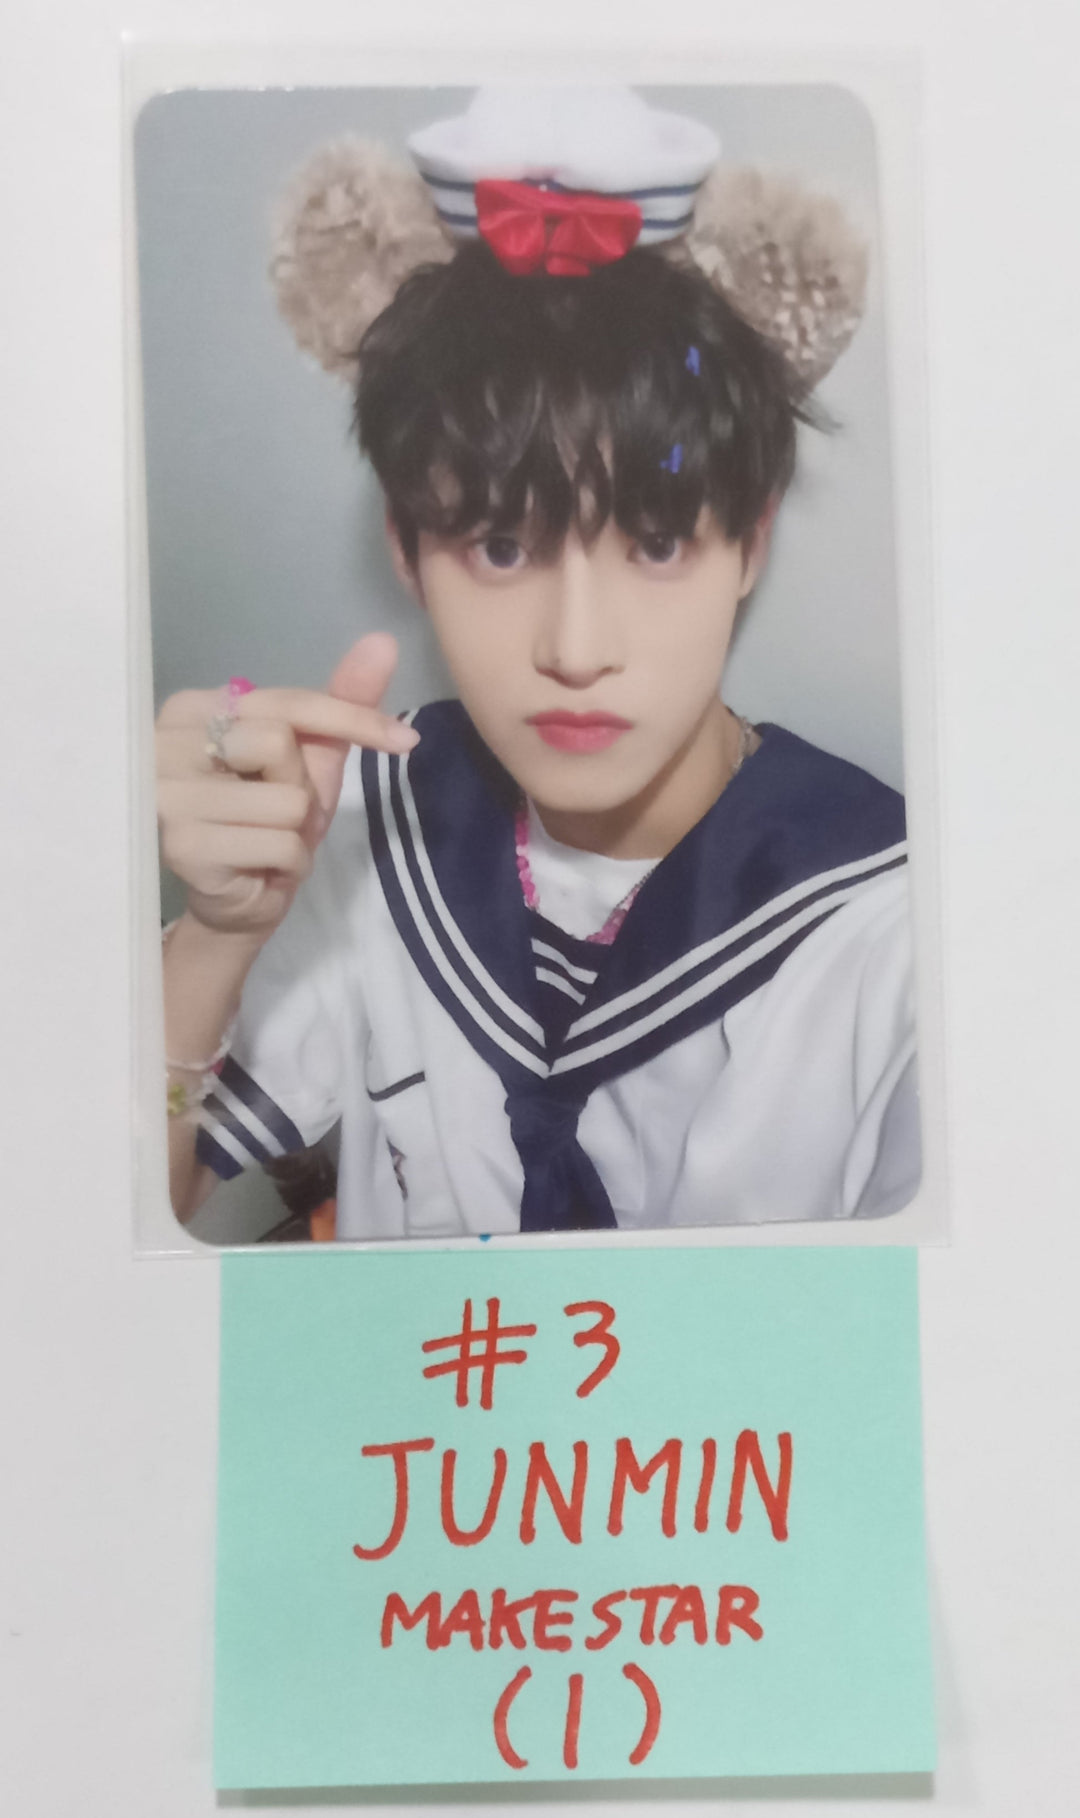 Xikers "HOUSE OF TRICKY : How to Play" - Makestar Fansign Event Photocard Round 4 [Restocked] [23.09.20]